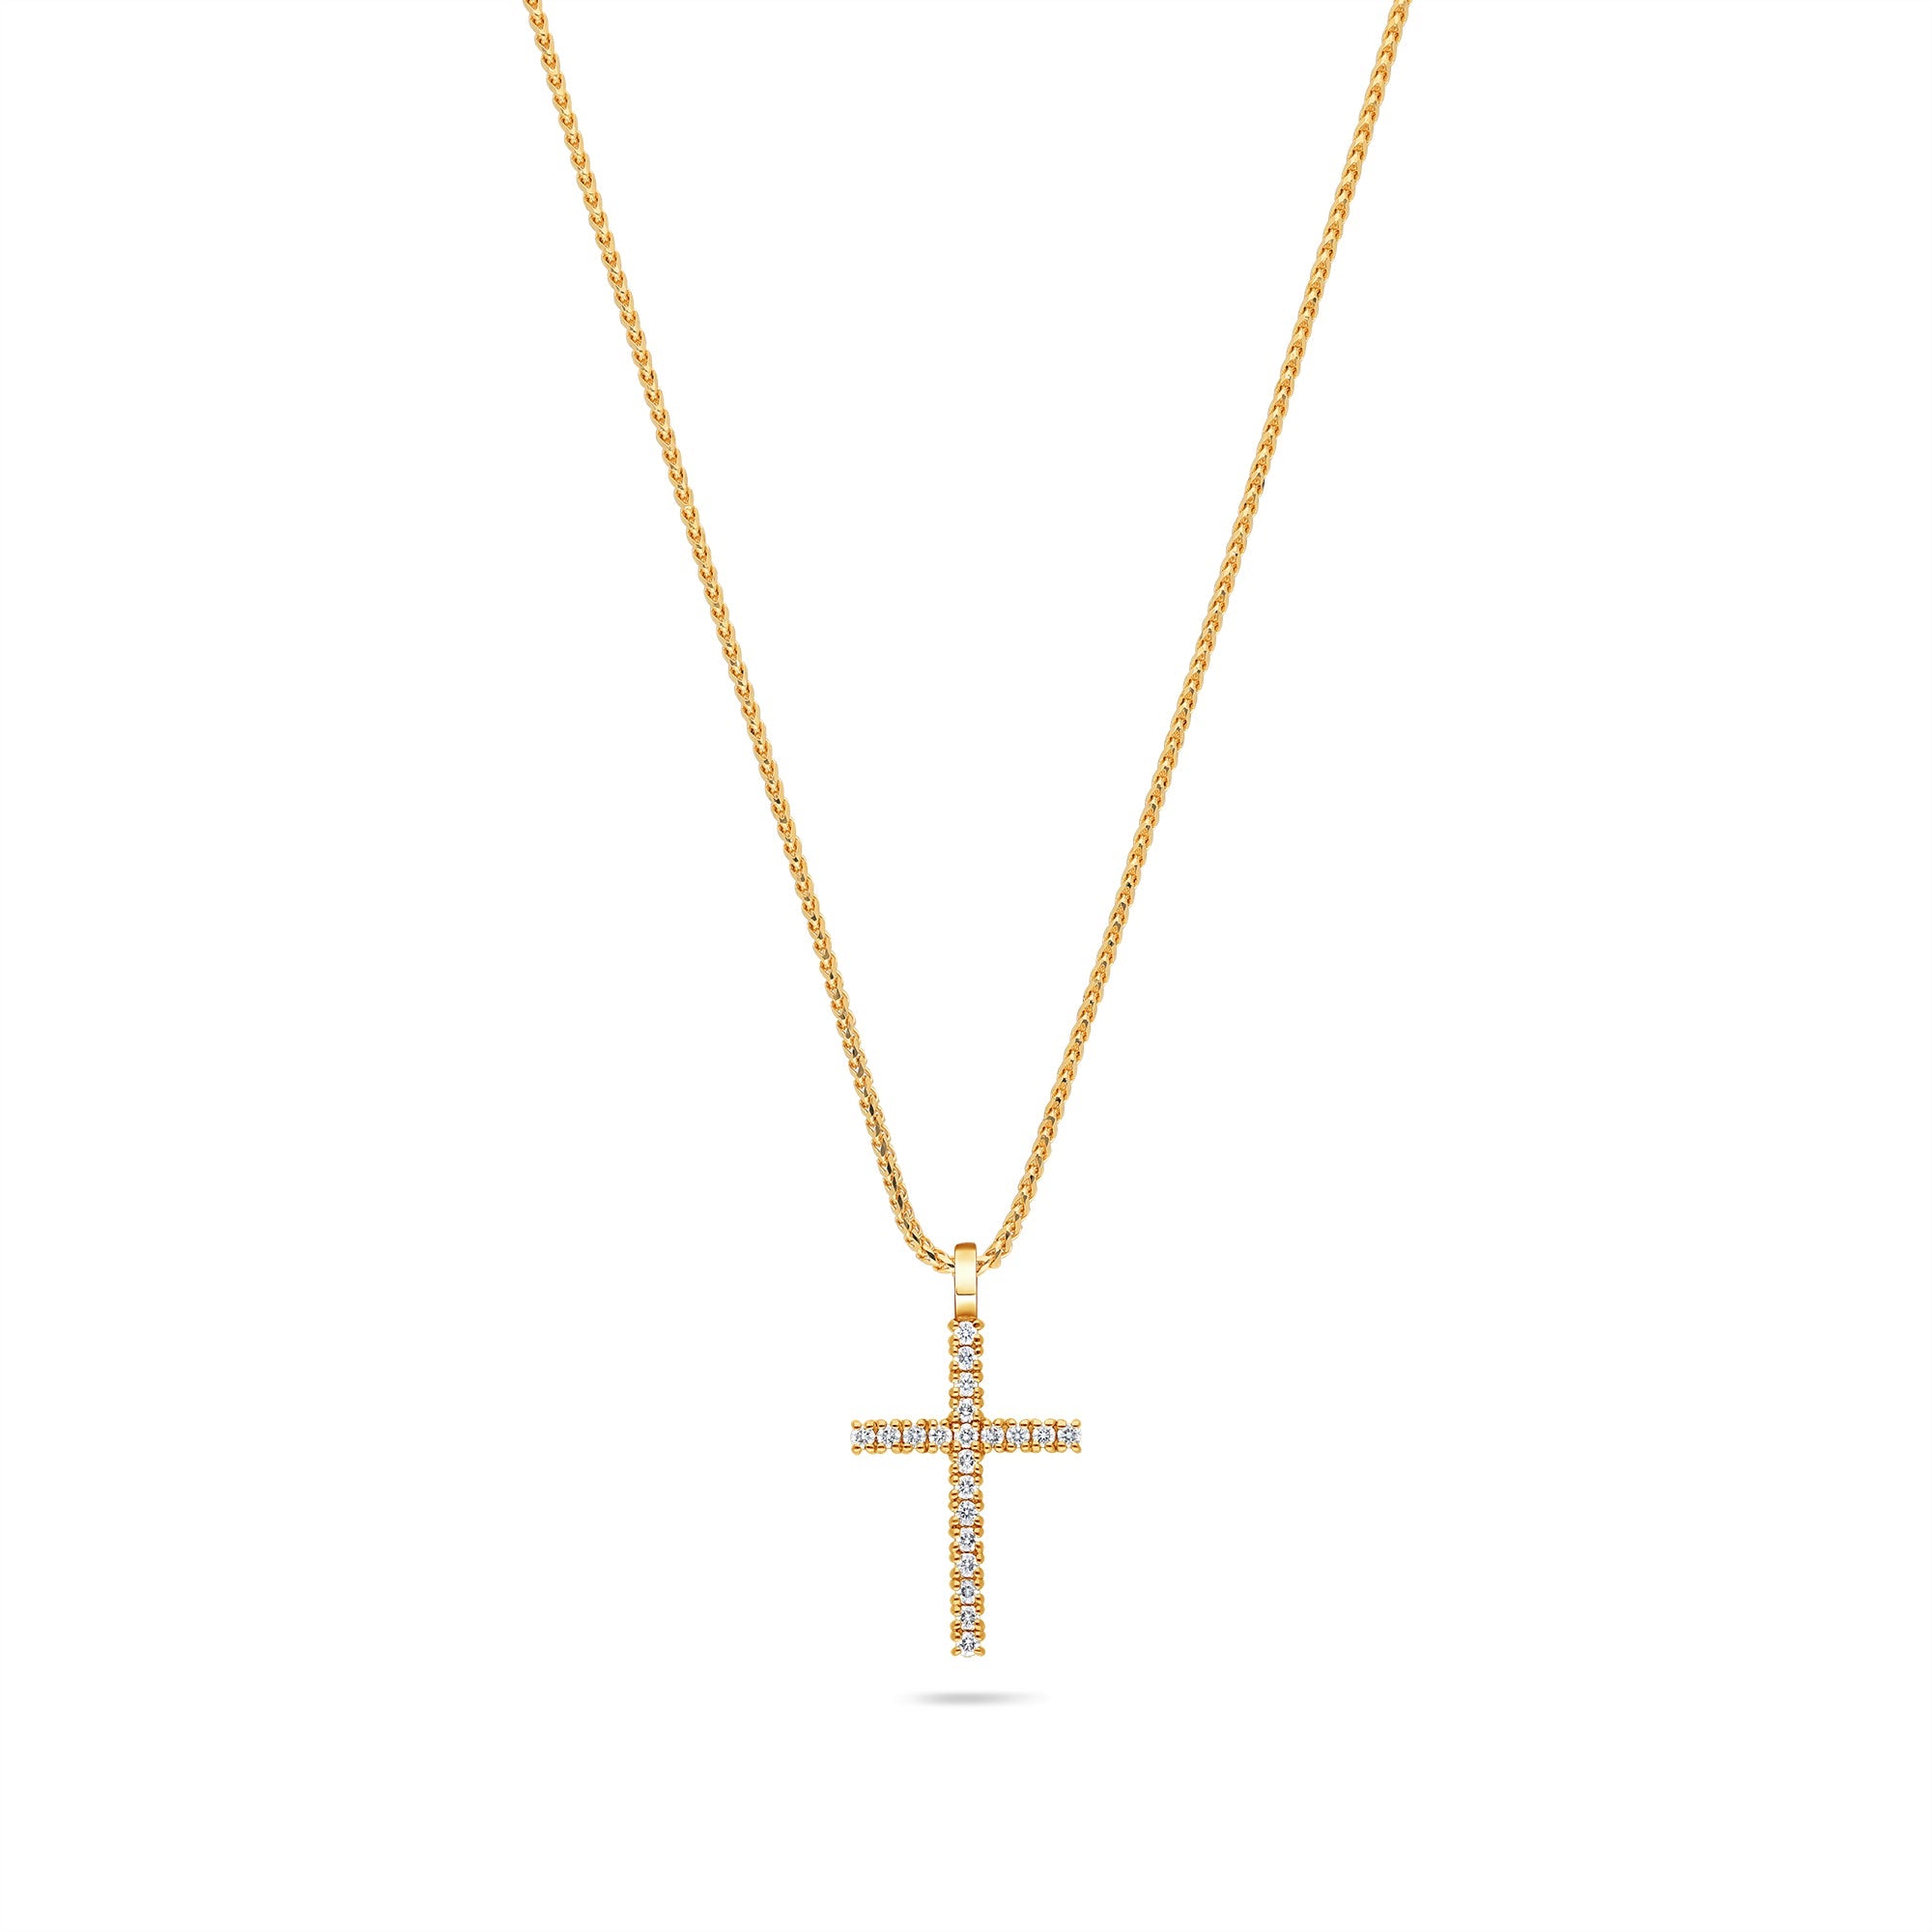 Religious Jewelry Mens 14K Gold Cross Pendant - JCPenney